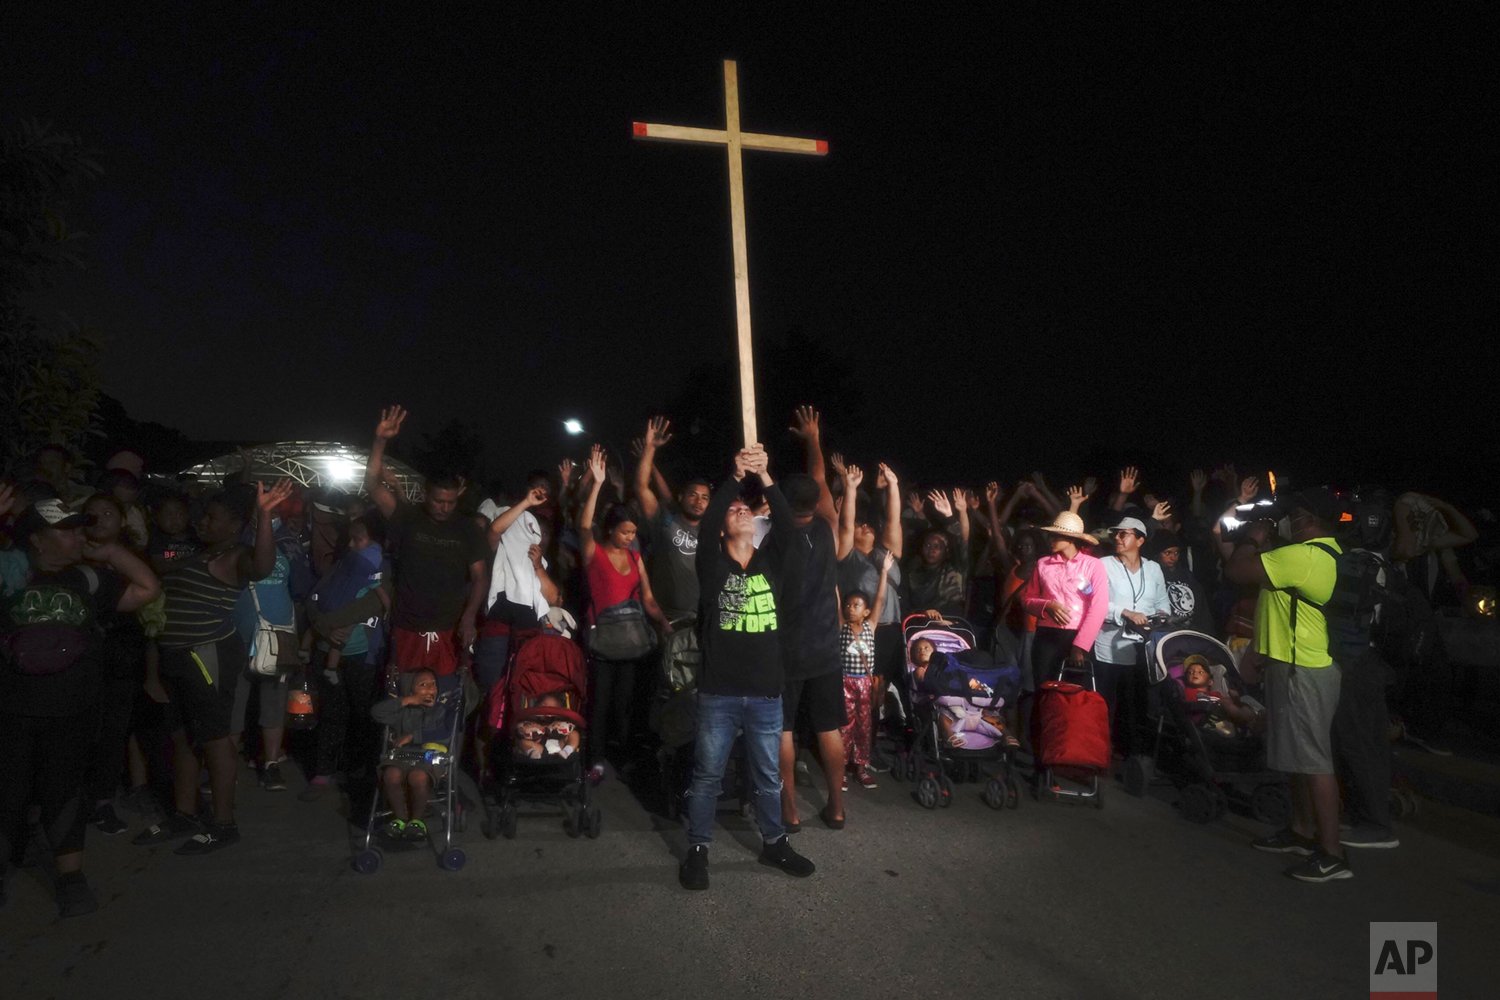  A migrant holds up a cross at the front of a migrant group leaving Huixtla by foot in Chiapas state, Mexico, Oct. 27, 2021, continuing their trek north toward Mexico's northern states and the U.S. border. (AP Photo/Marco Ugarte) 